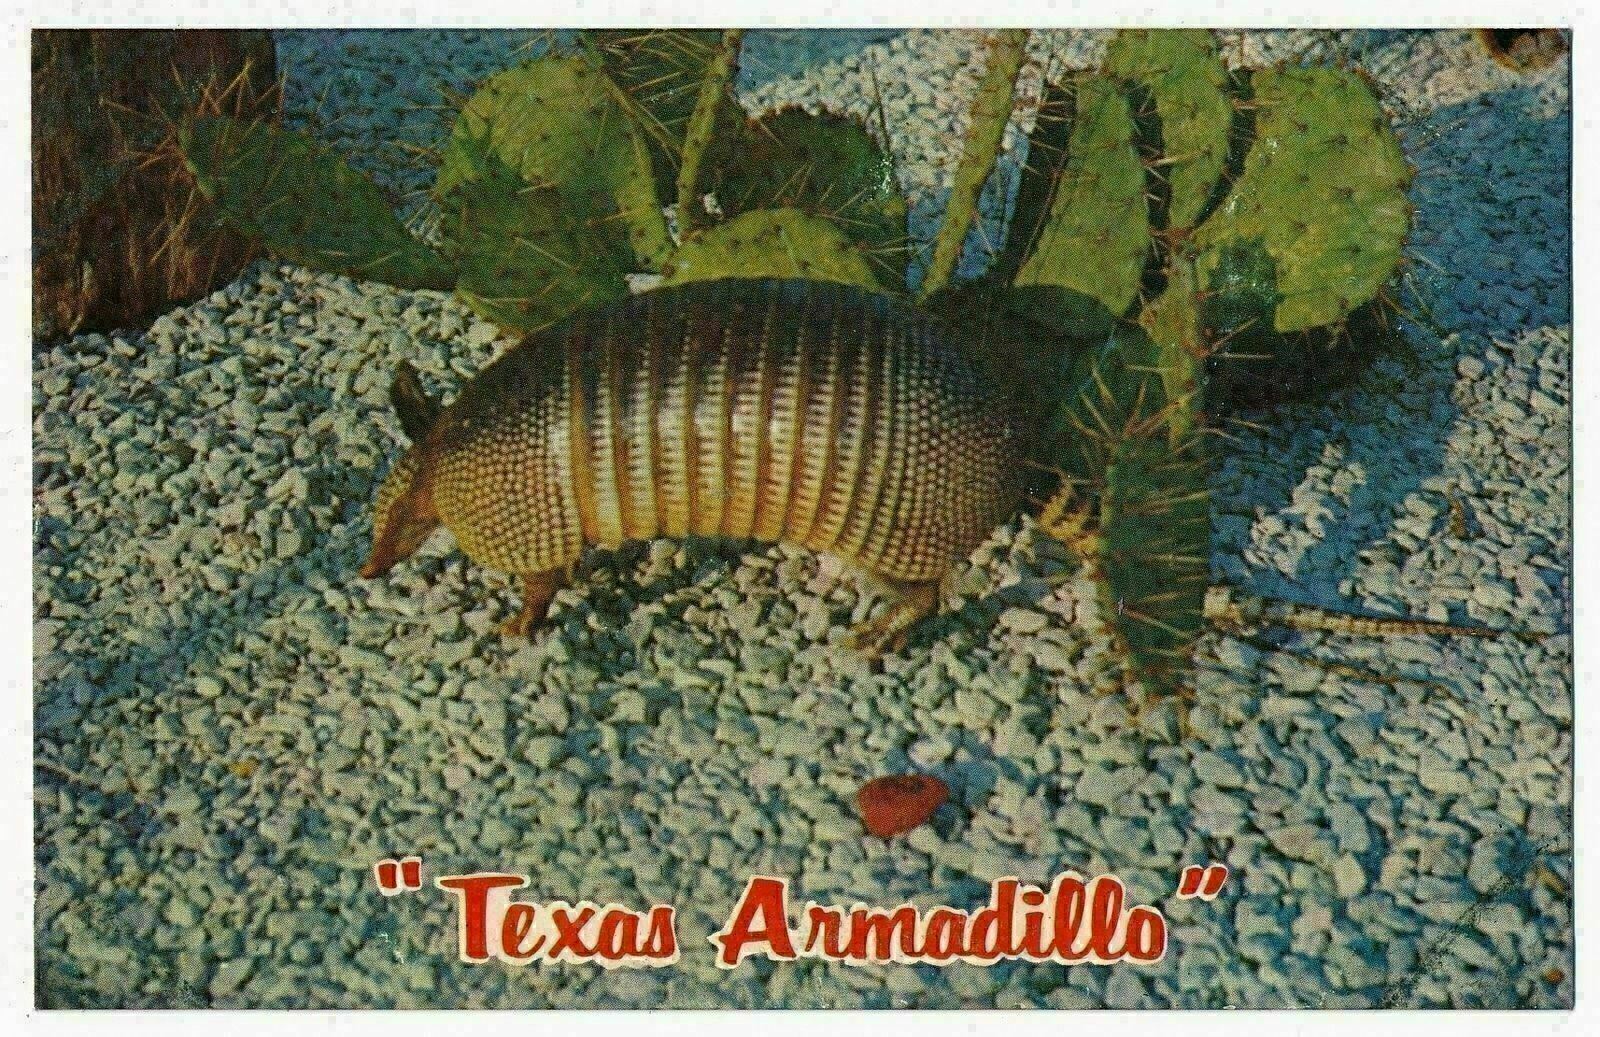 The Texas Armadillo - Official State Small Mammal